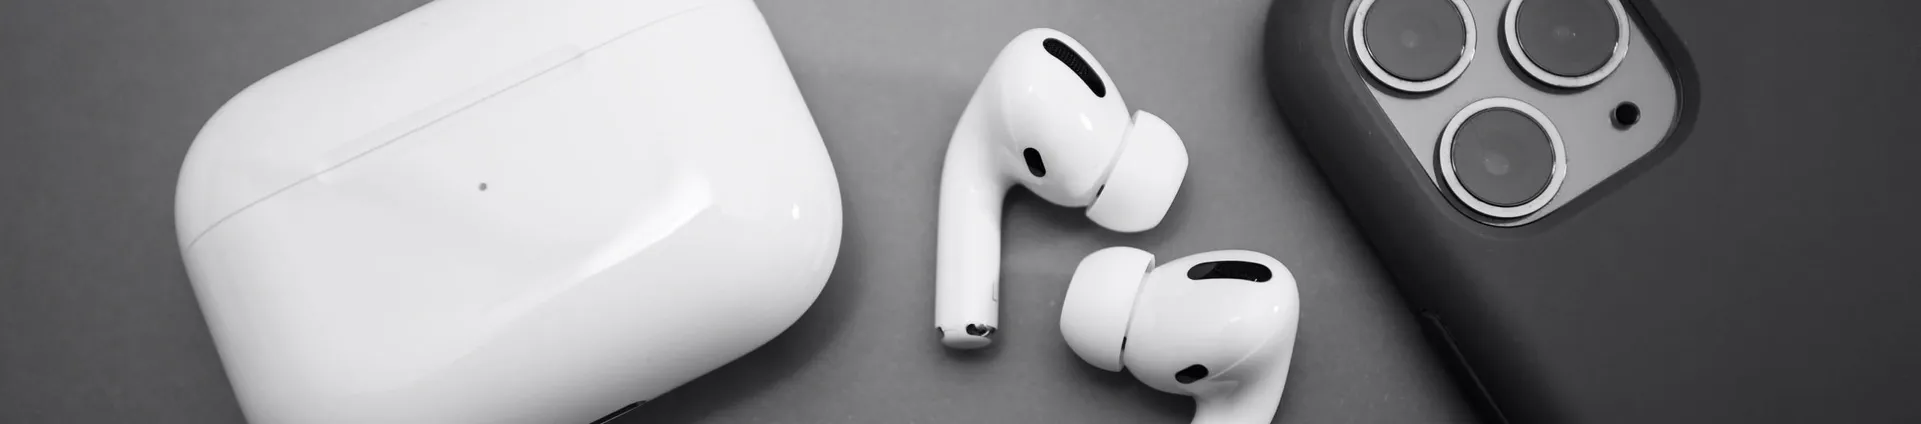 Black Friday Airpods Pro